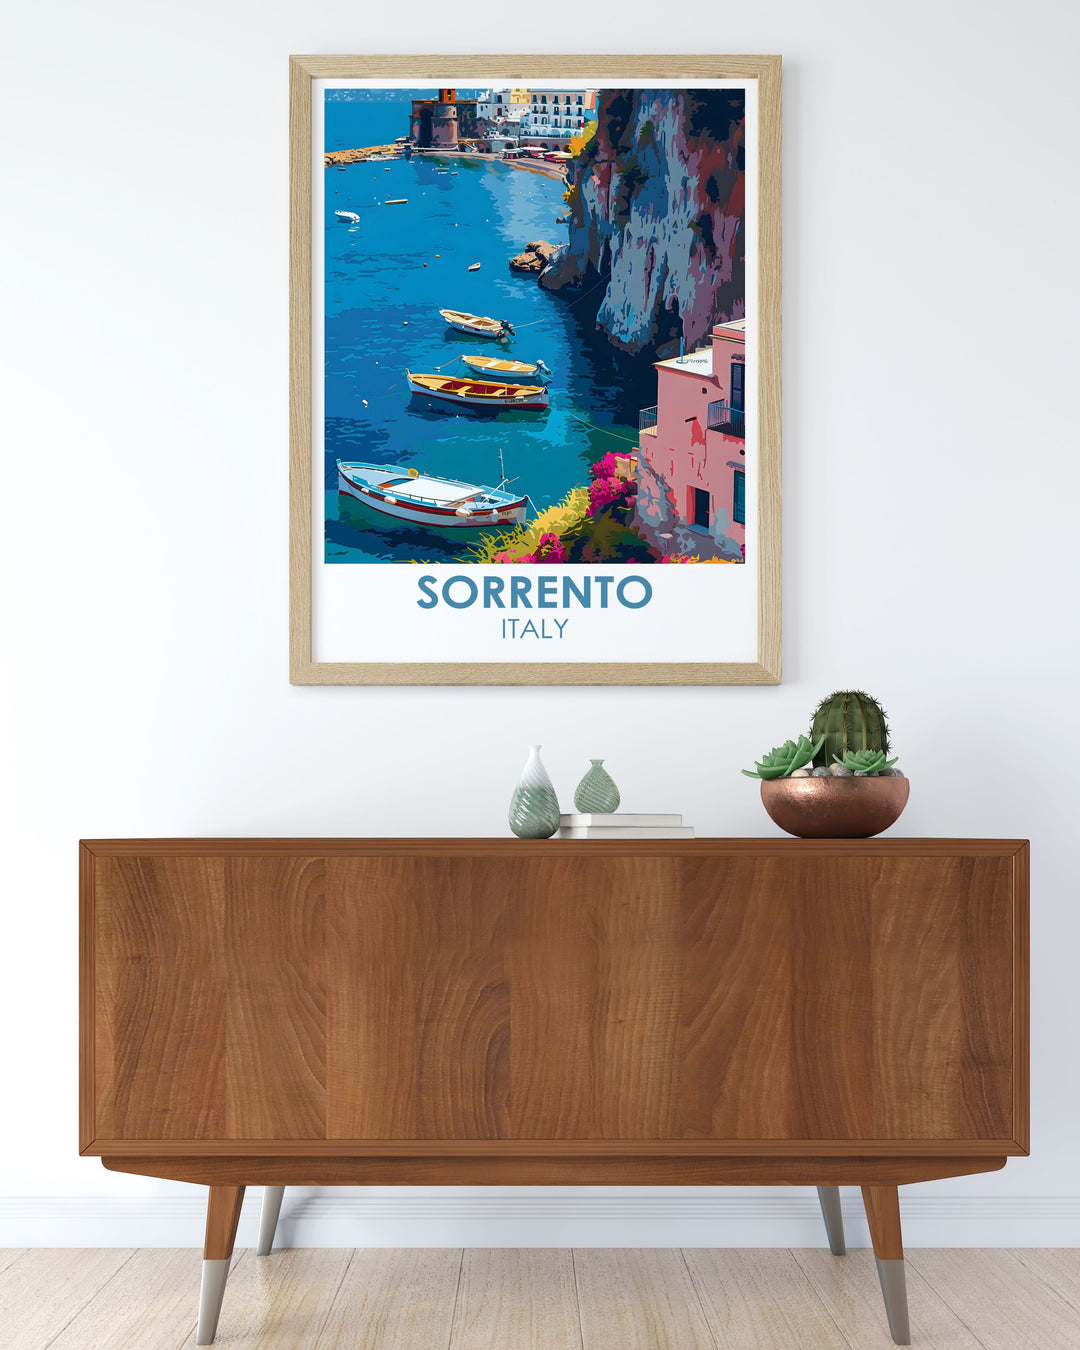 Italy travel print showcasing the serene beauty of Sorrento Italy with Marina Grande mountain and picturesque harbor. Ideal for creating an inviting and artistic atmosphere in your living space this Sorrento art print is a stunning addition to any home decor collection.